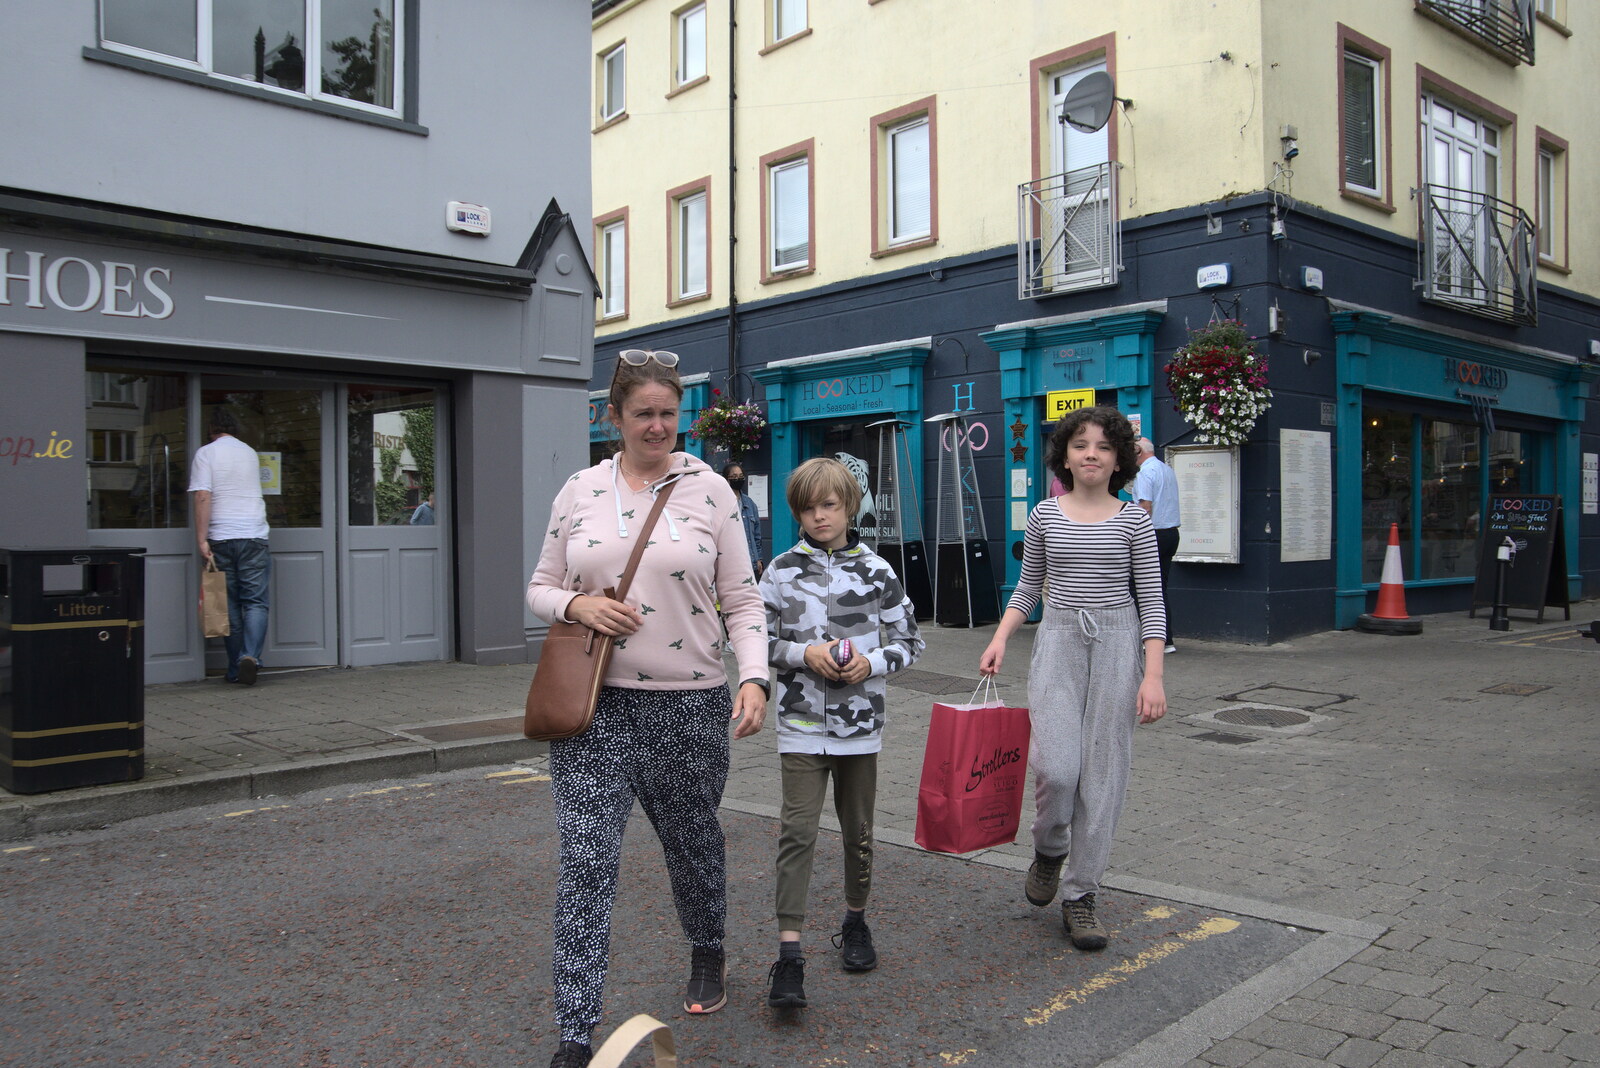 A Trip to Manorhamilton, County Leitrim, Ireland - 11th August 2021: Isobel, Harry and Fern return from a spree